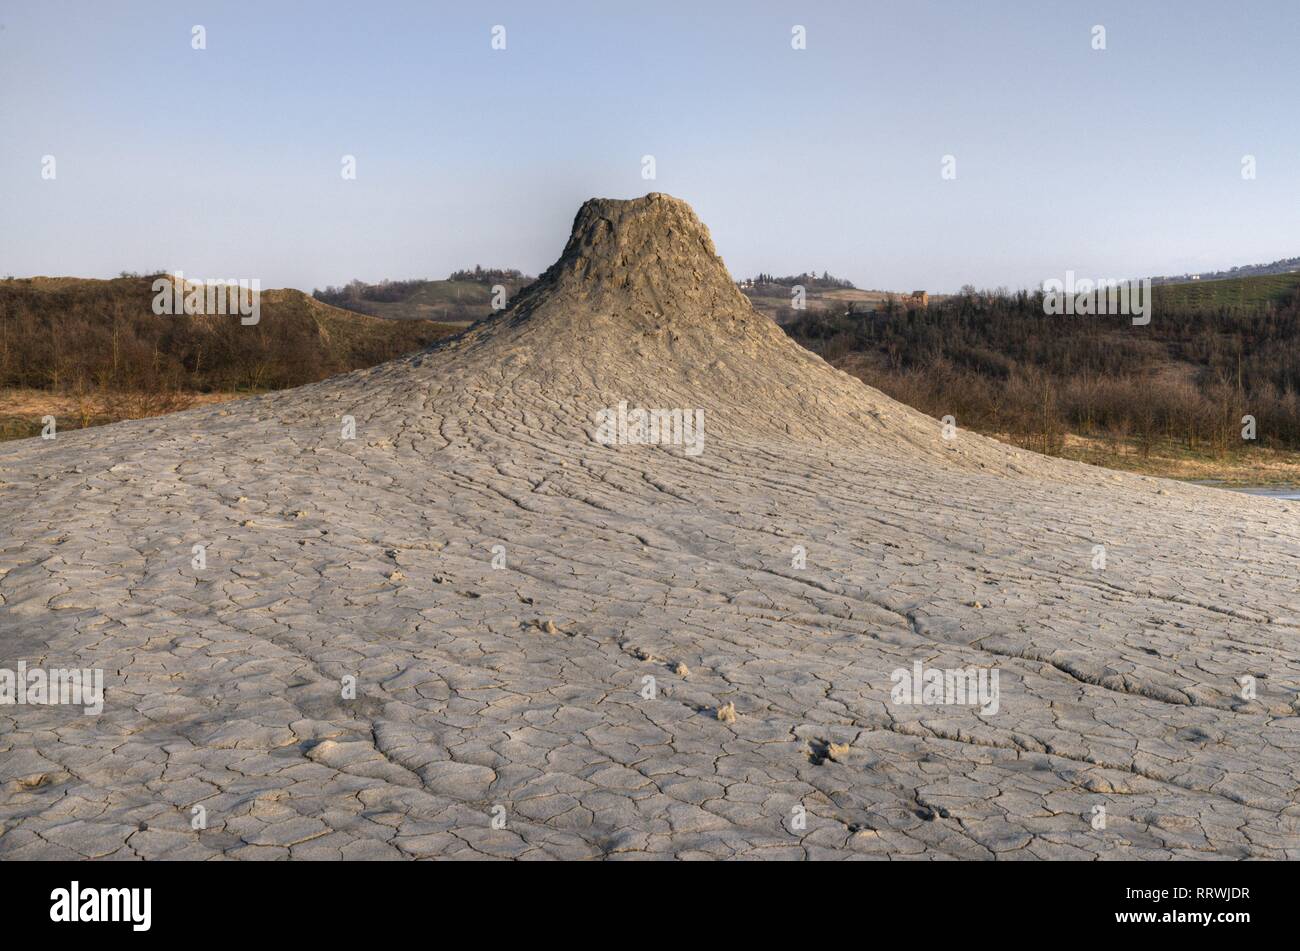 A mud volcano in the Natural Reserve Salse di Nirano. Mud volcanoes and craters in Emilia Romagna, Italy. Stock Photo